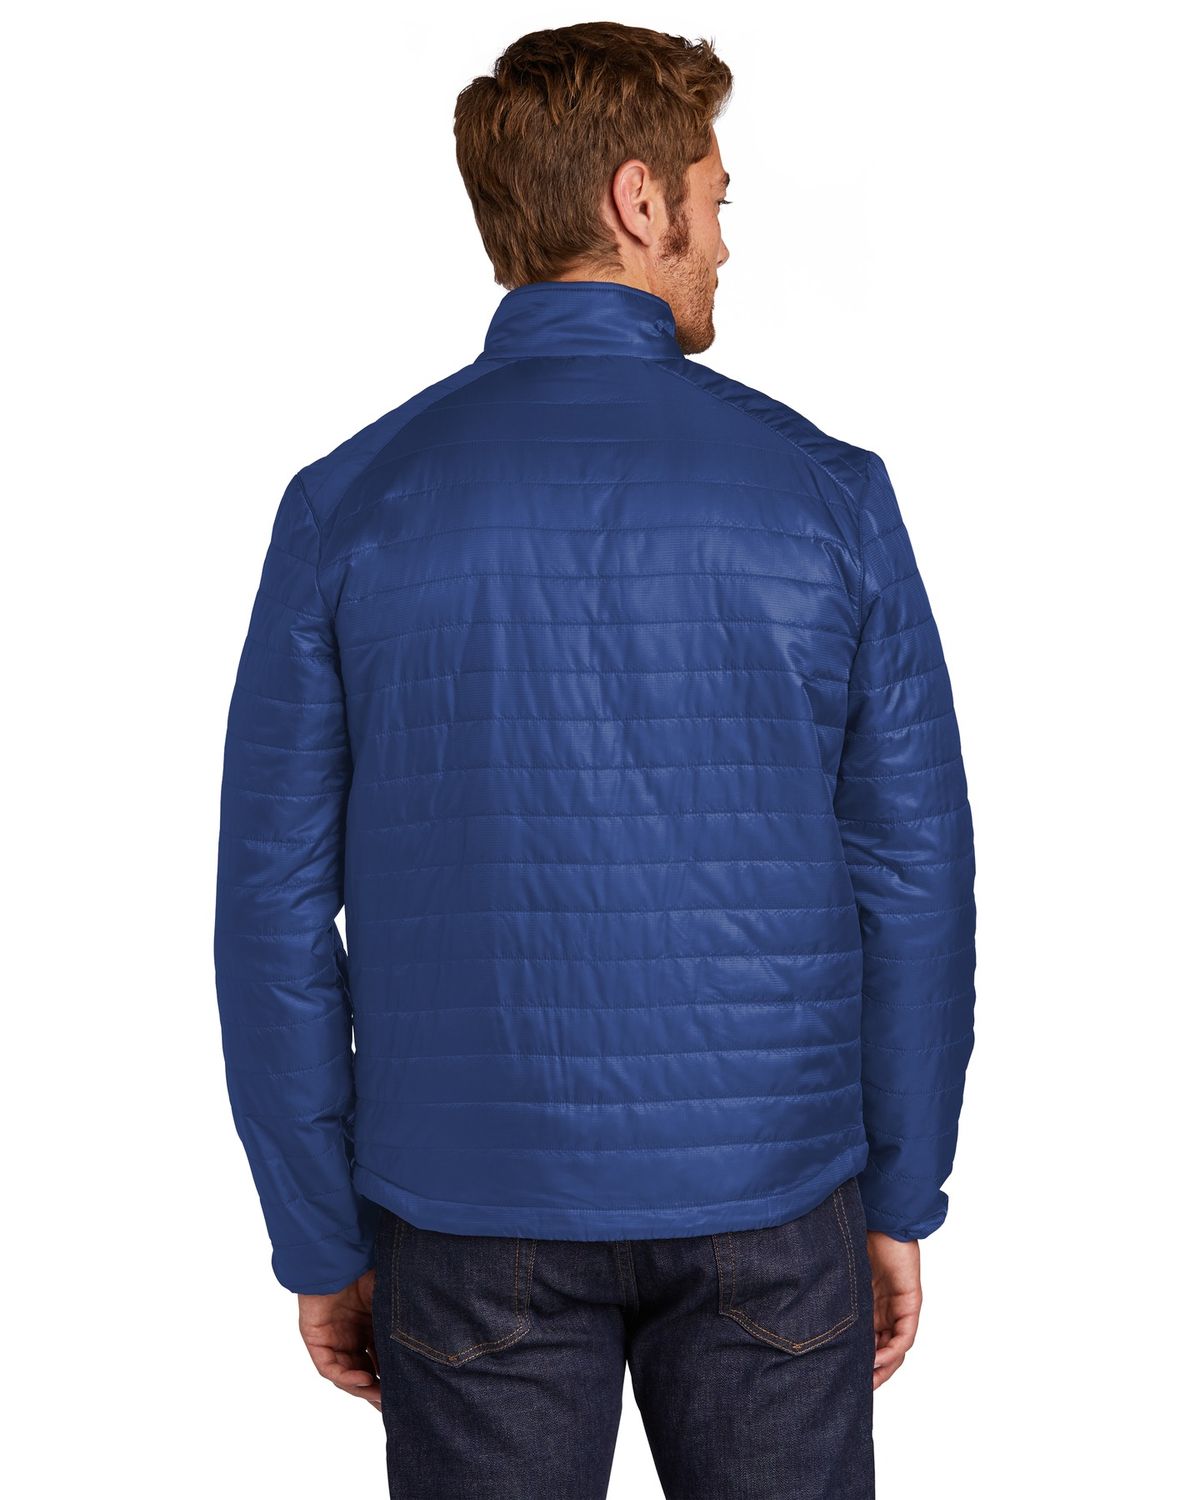 'Port Authority J850 Packable Puffy Jacket'